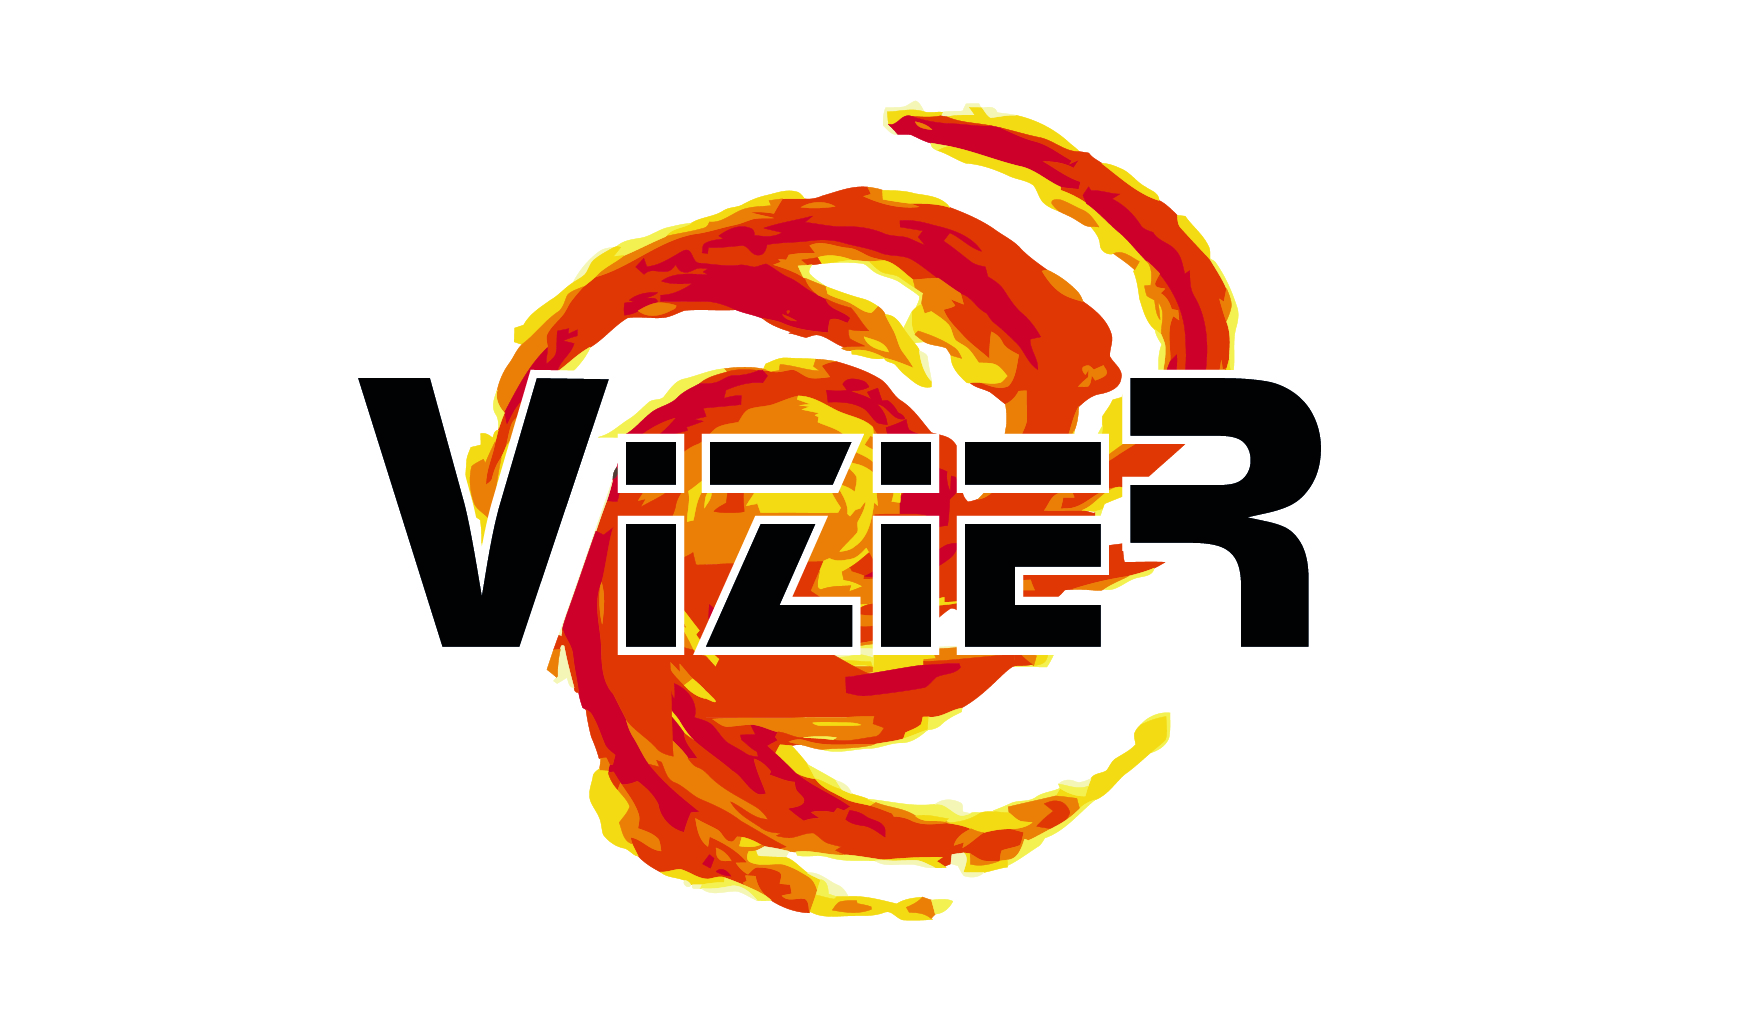 VizieR - The catalogue service for the CDS reference collection of astronomical catalogues and tables published in academic journals